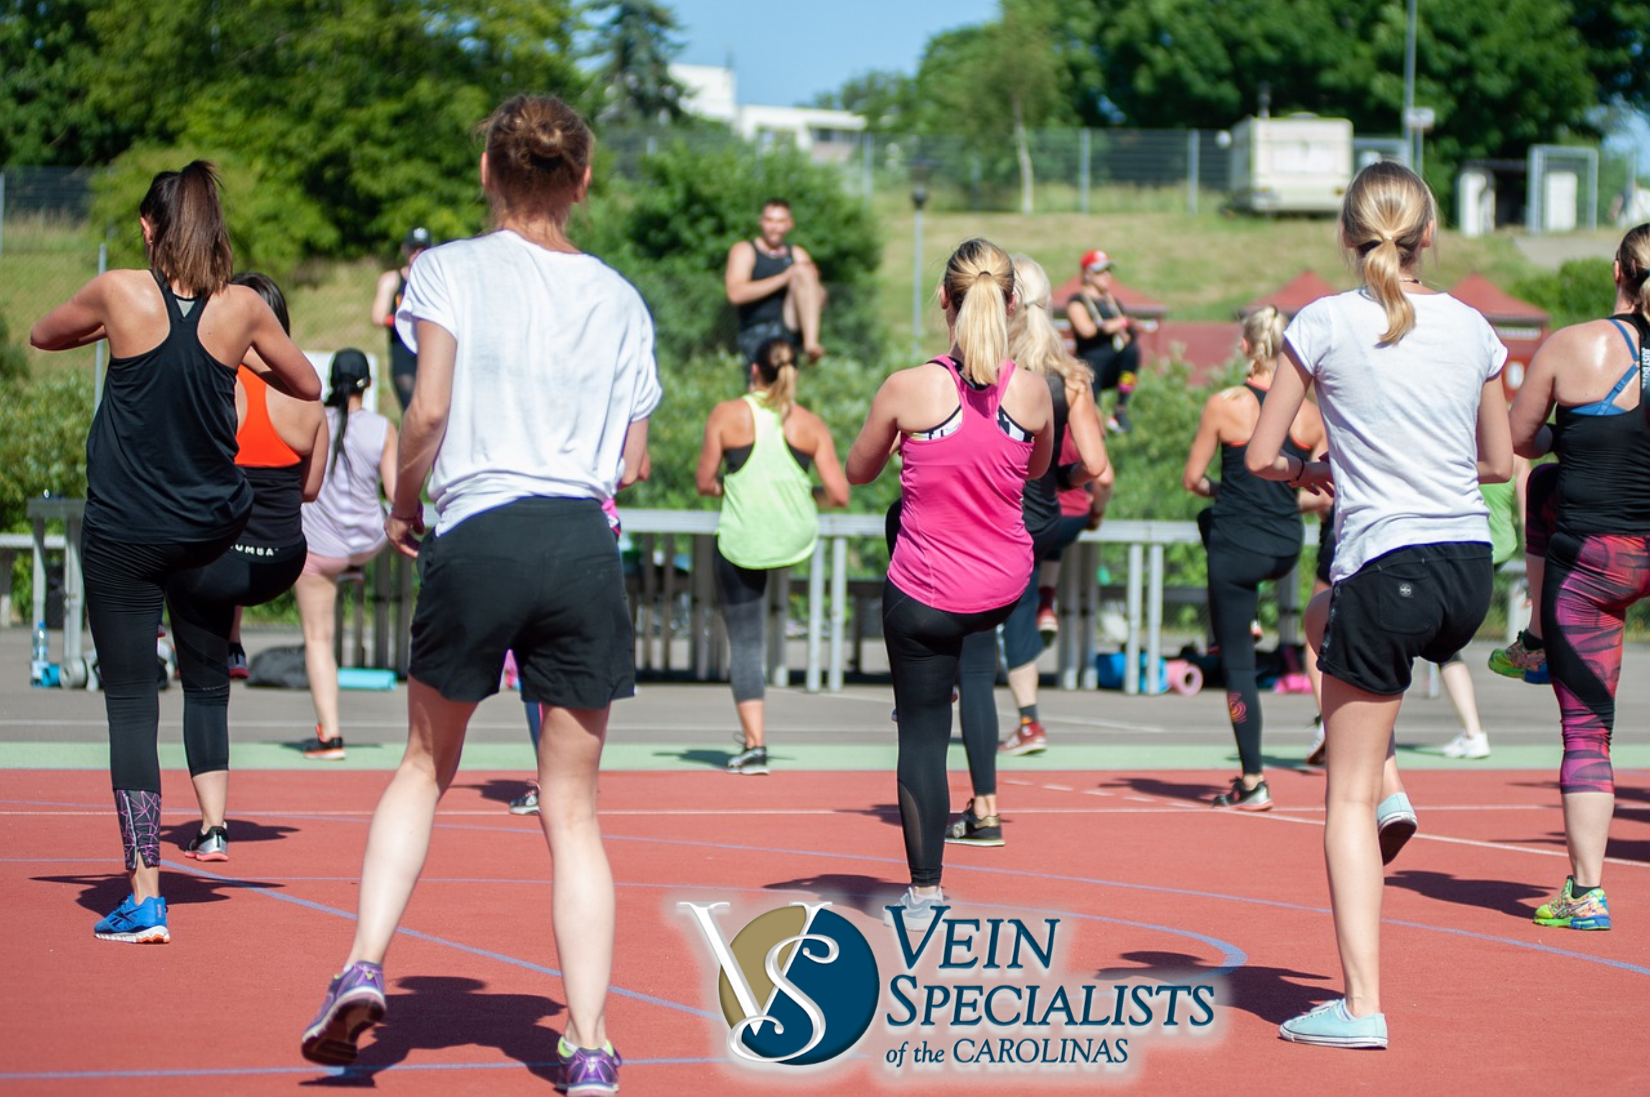 Importance of Regular Physical Activity For Veins and Overall Health